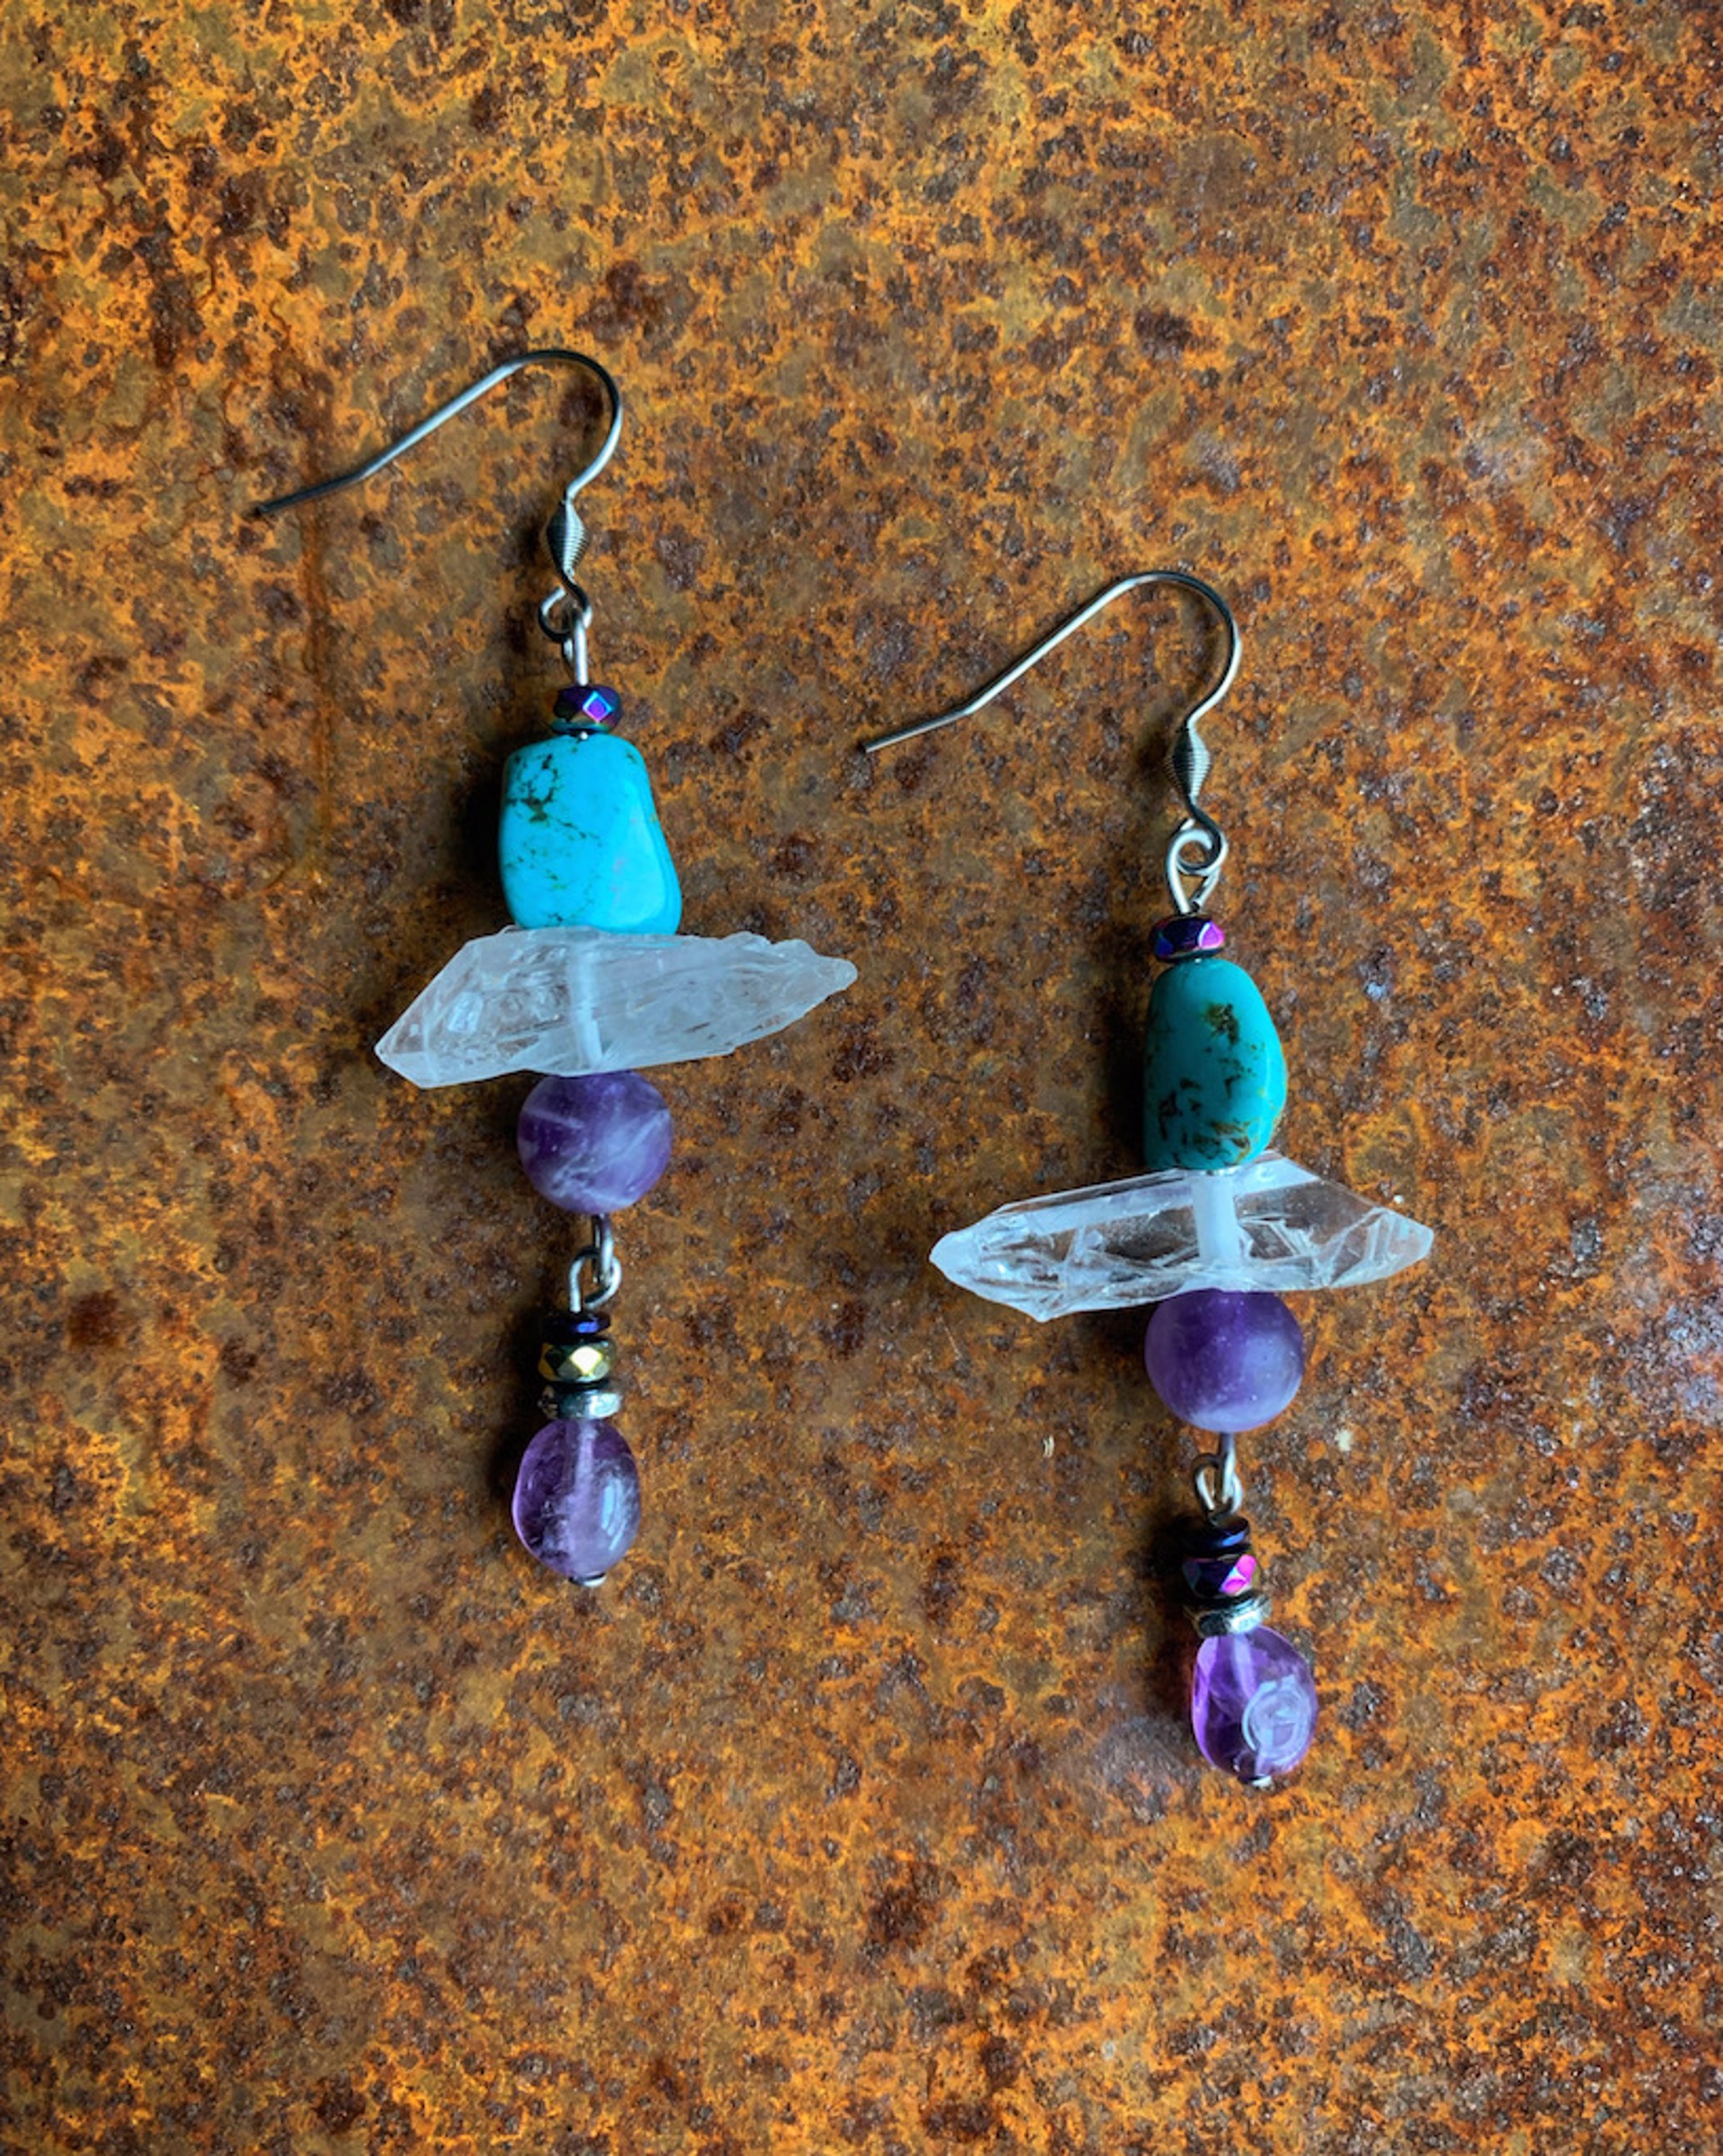 K705 Quartz, Amethyst, and Turquoise Earrings by Kelly Ormsby